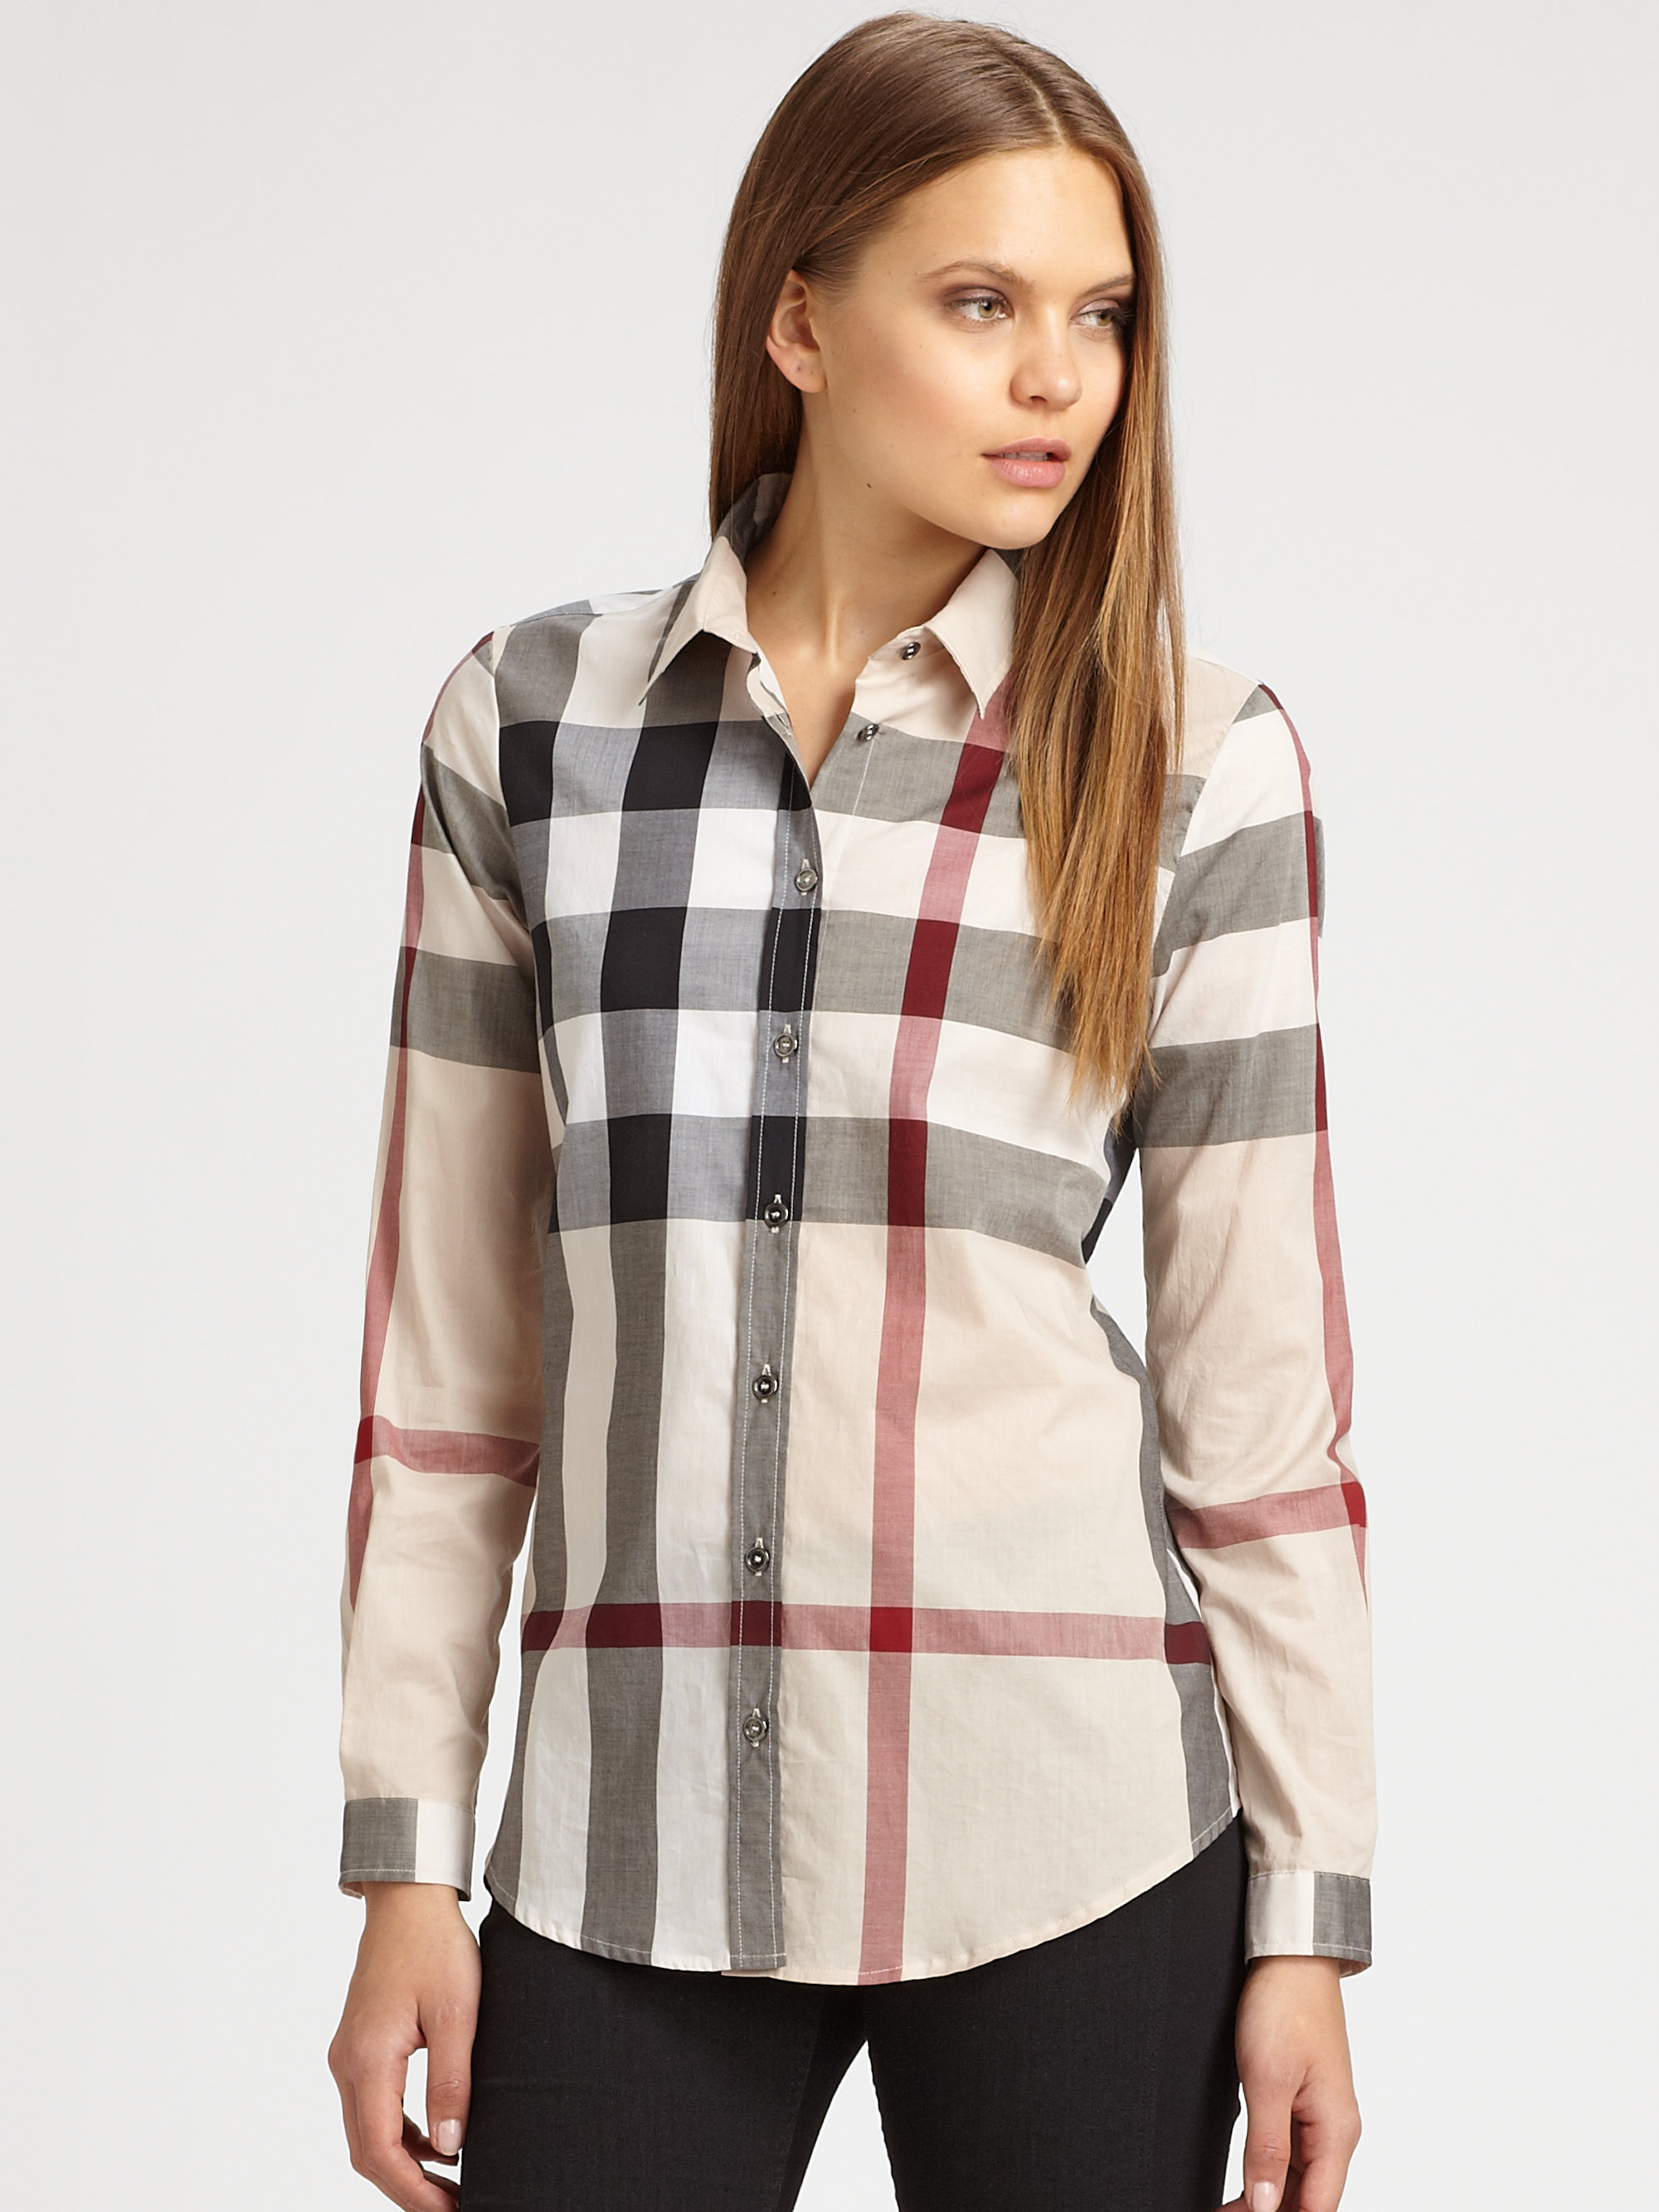 burberry tops on sale